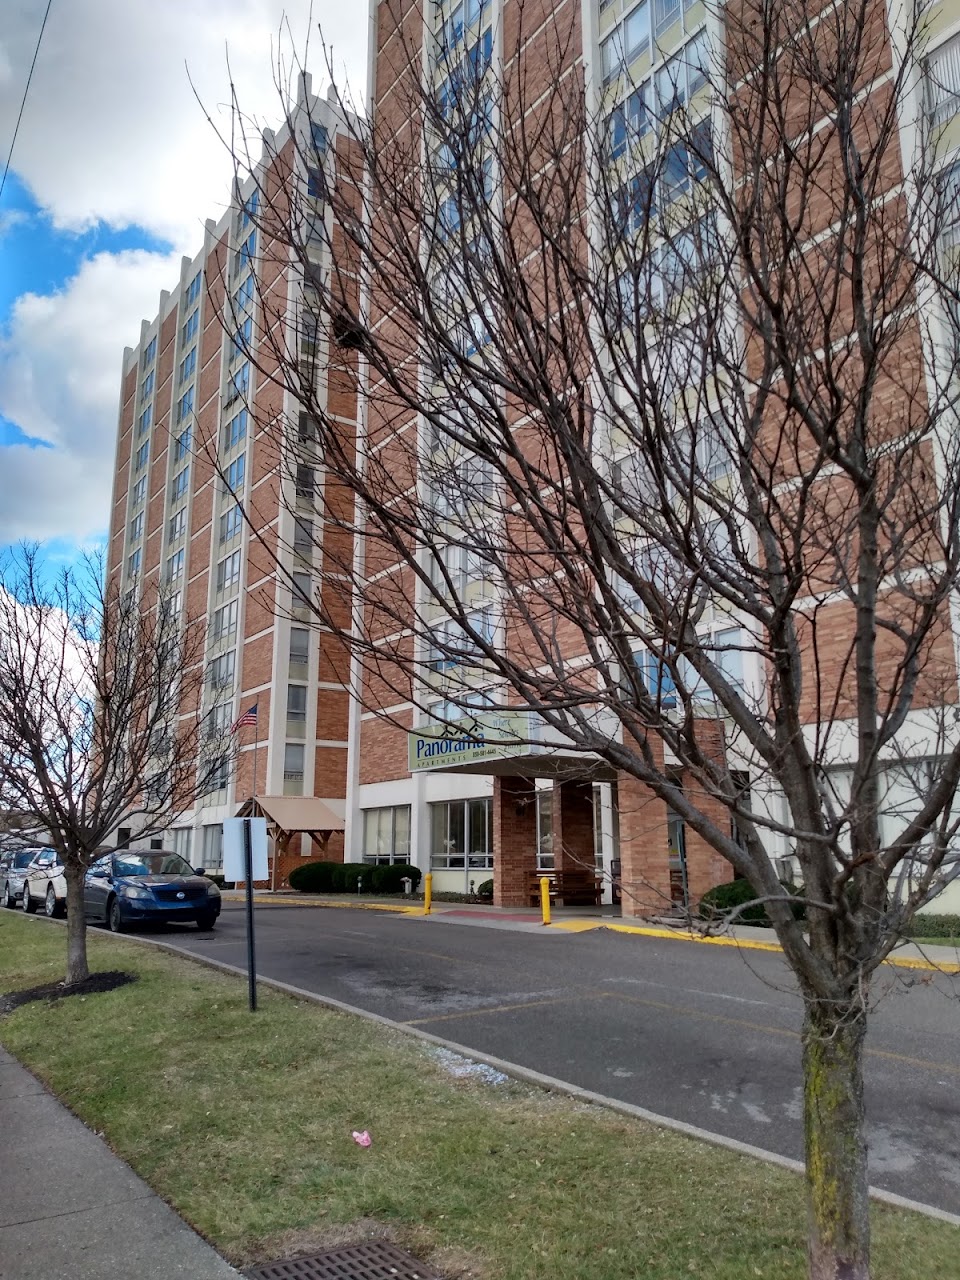 Photo of PANORAMA APARTMENTS EAST at BRENT SPENCE SQUARE COVINGTON, KY 41011